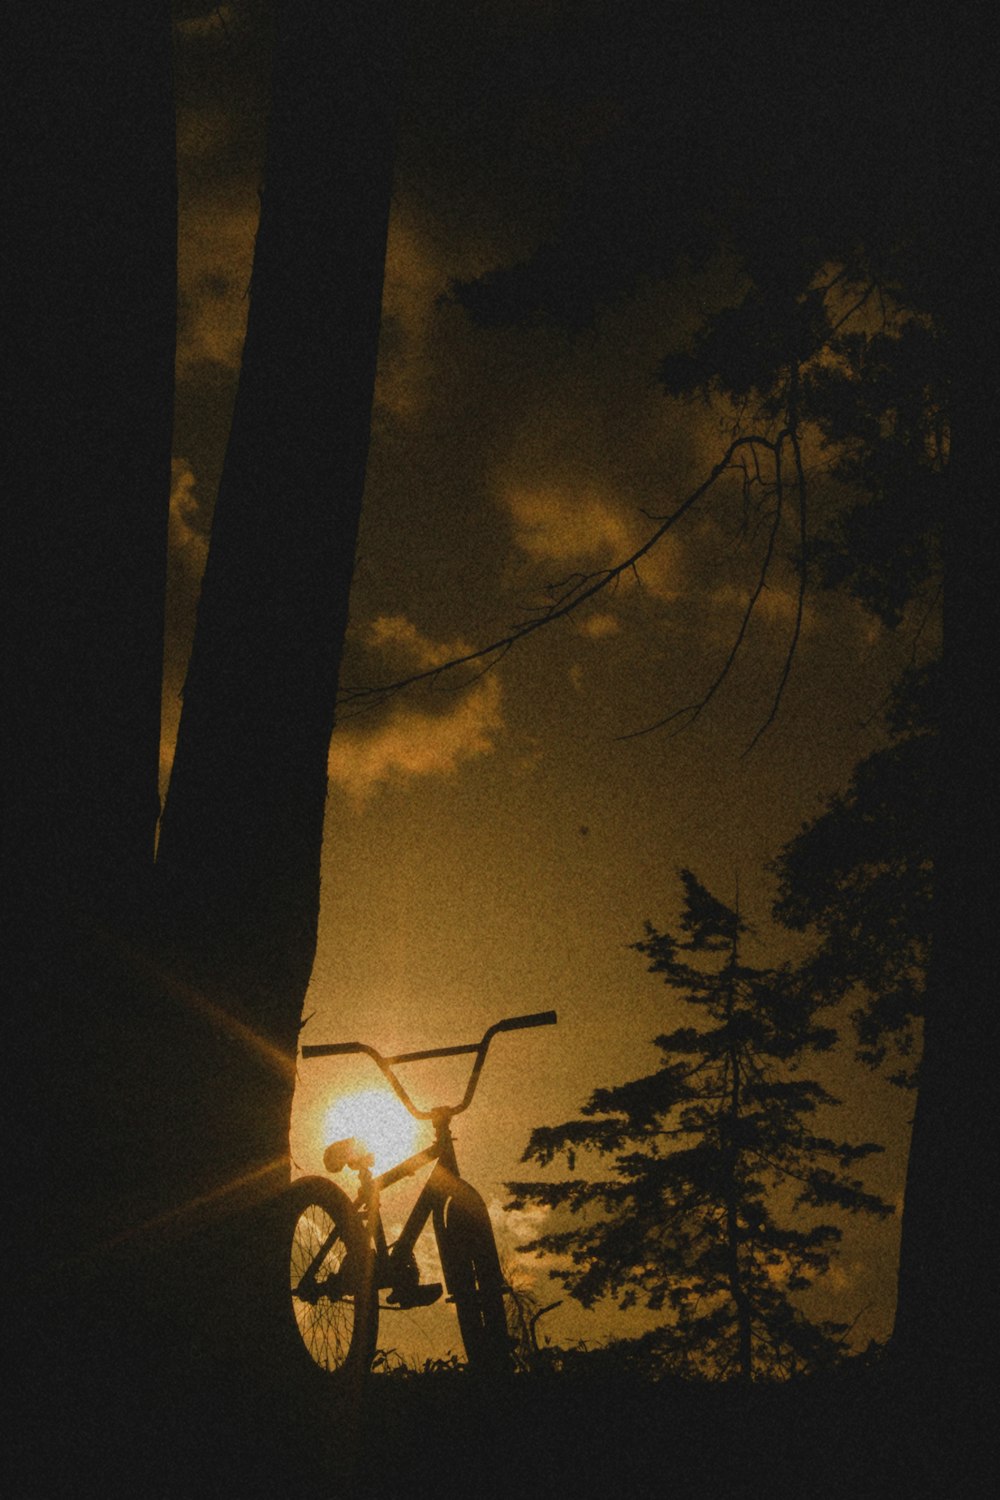 a bicycle is parked in the dark near a tree